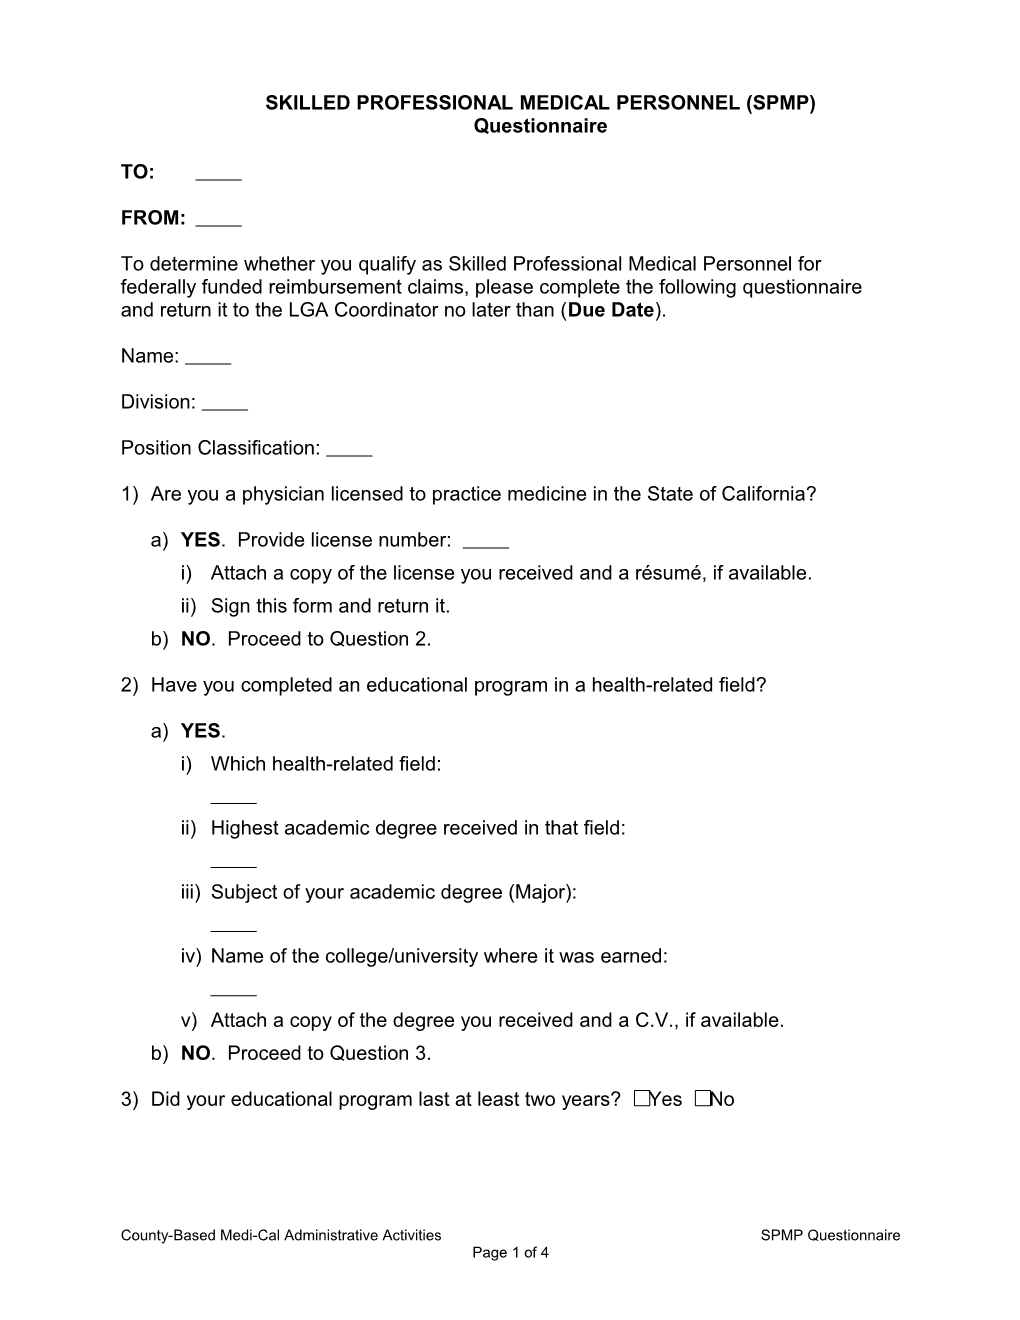 Skilled Professional Medical Personnel Questionnaire